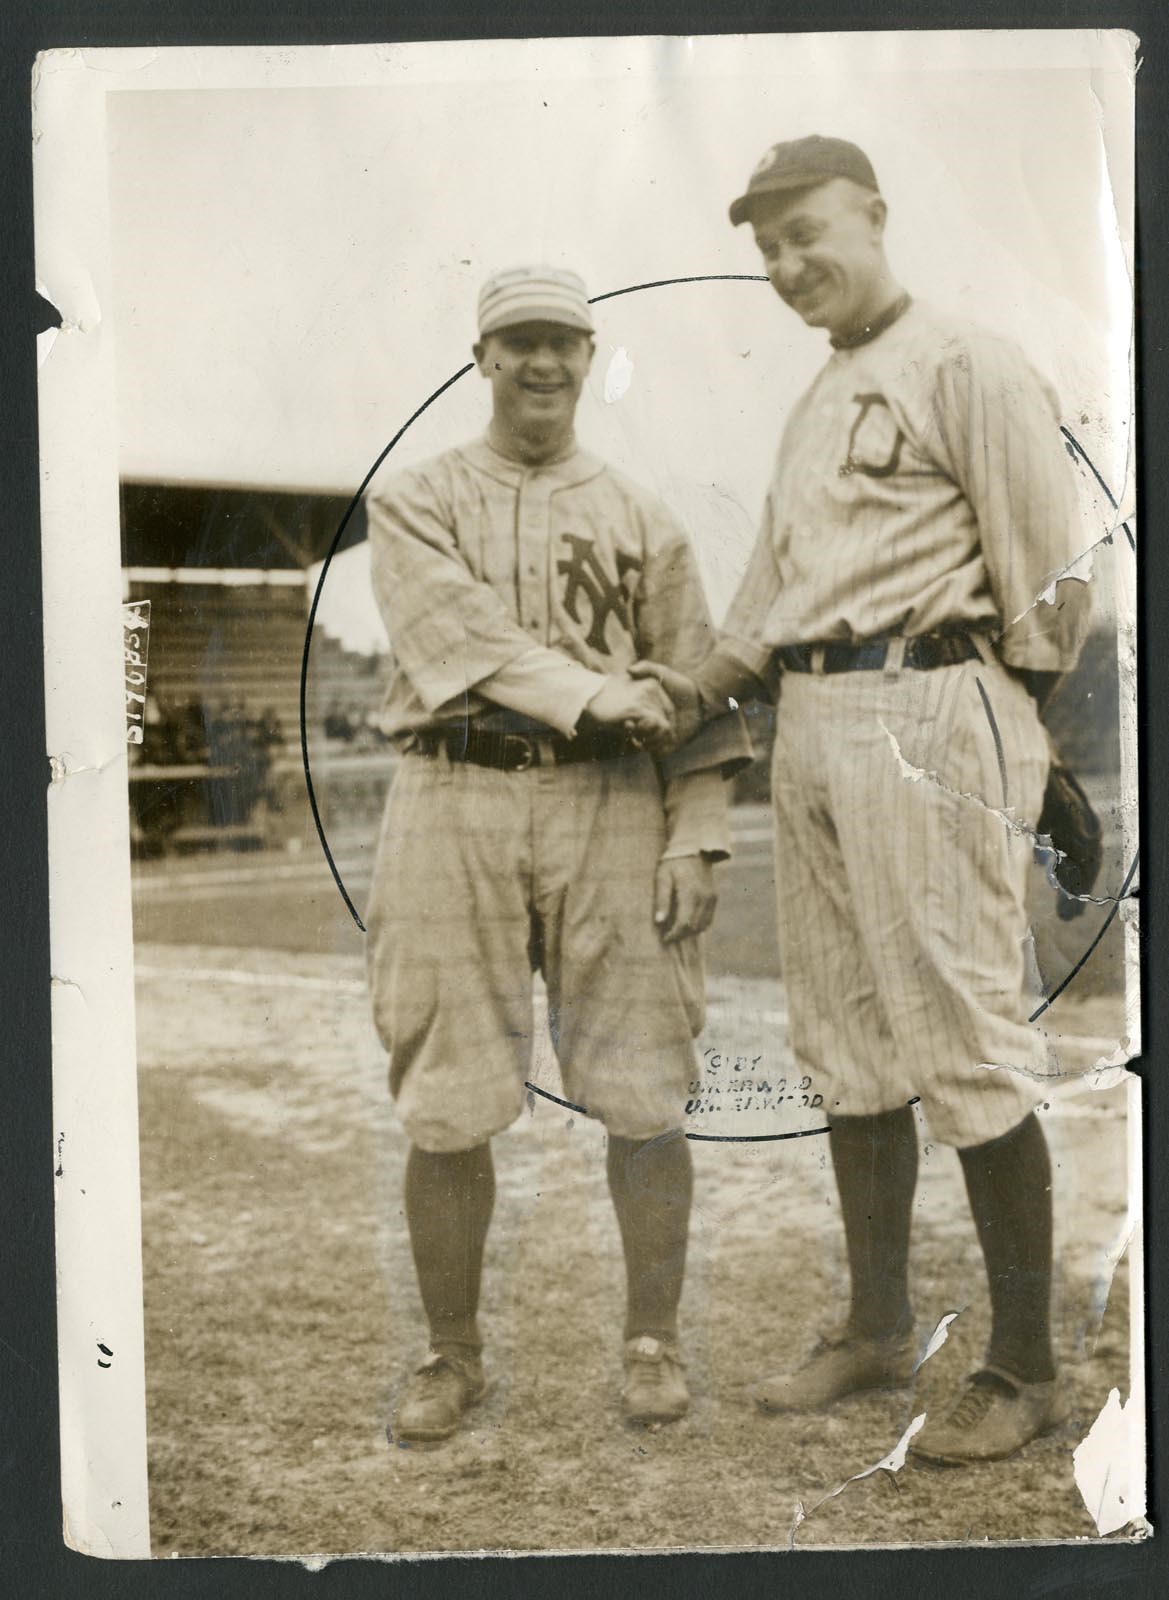 Best of the Best - 1916 "Ty Cobb" of the Federal League and Ty Cobb of the Majors